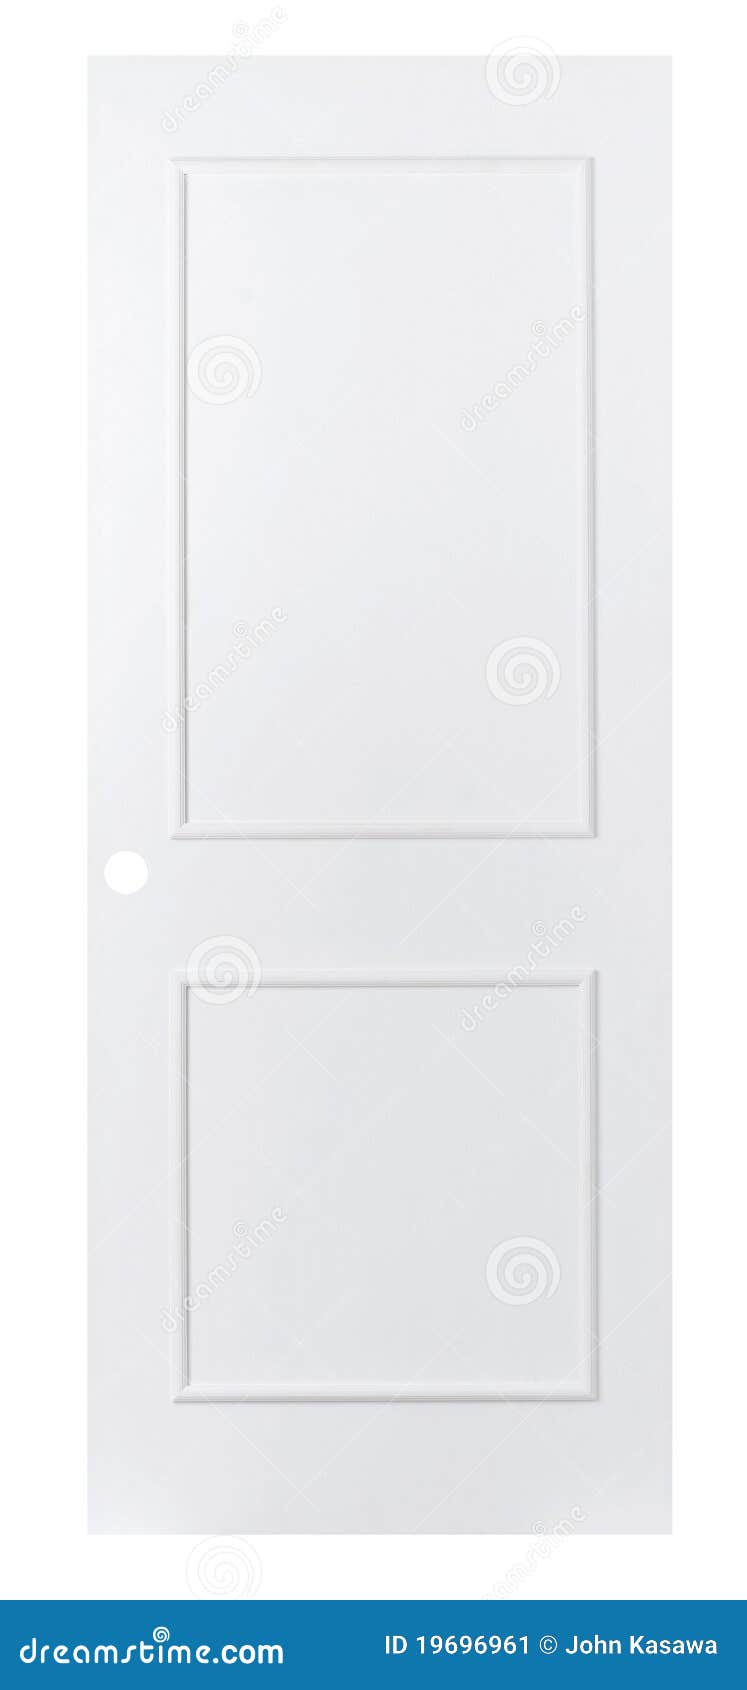 White Color Plain Leaf Door Isolated Stock Image - Image ...
